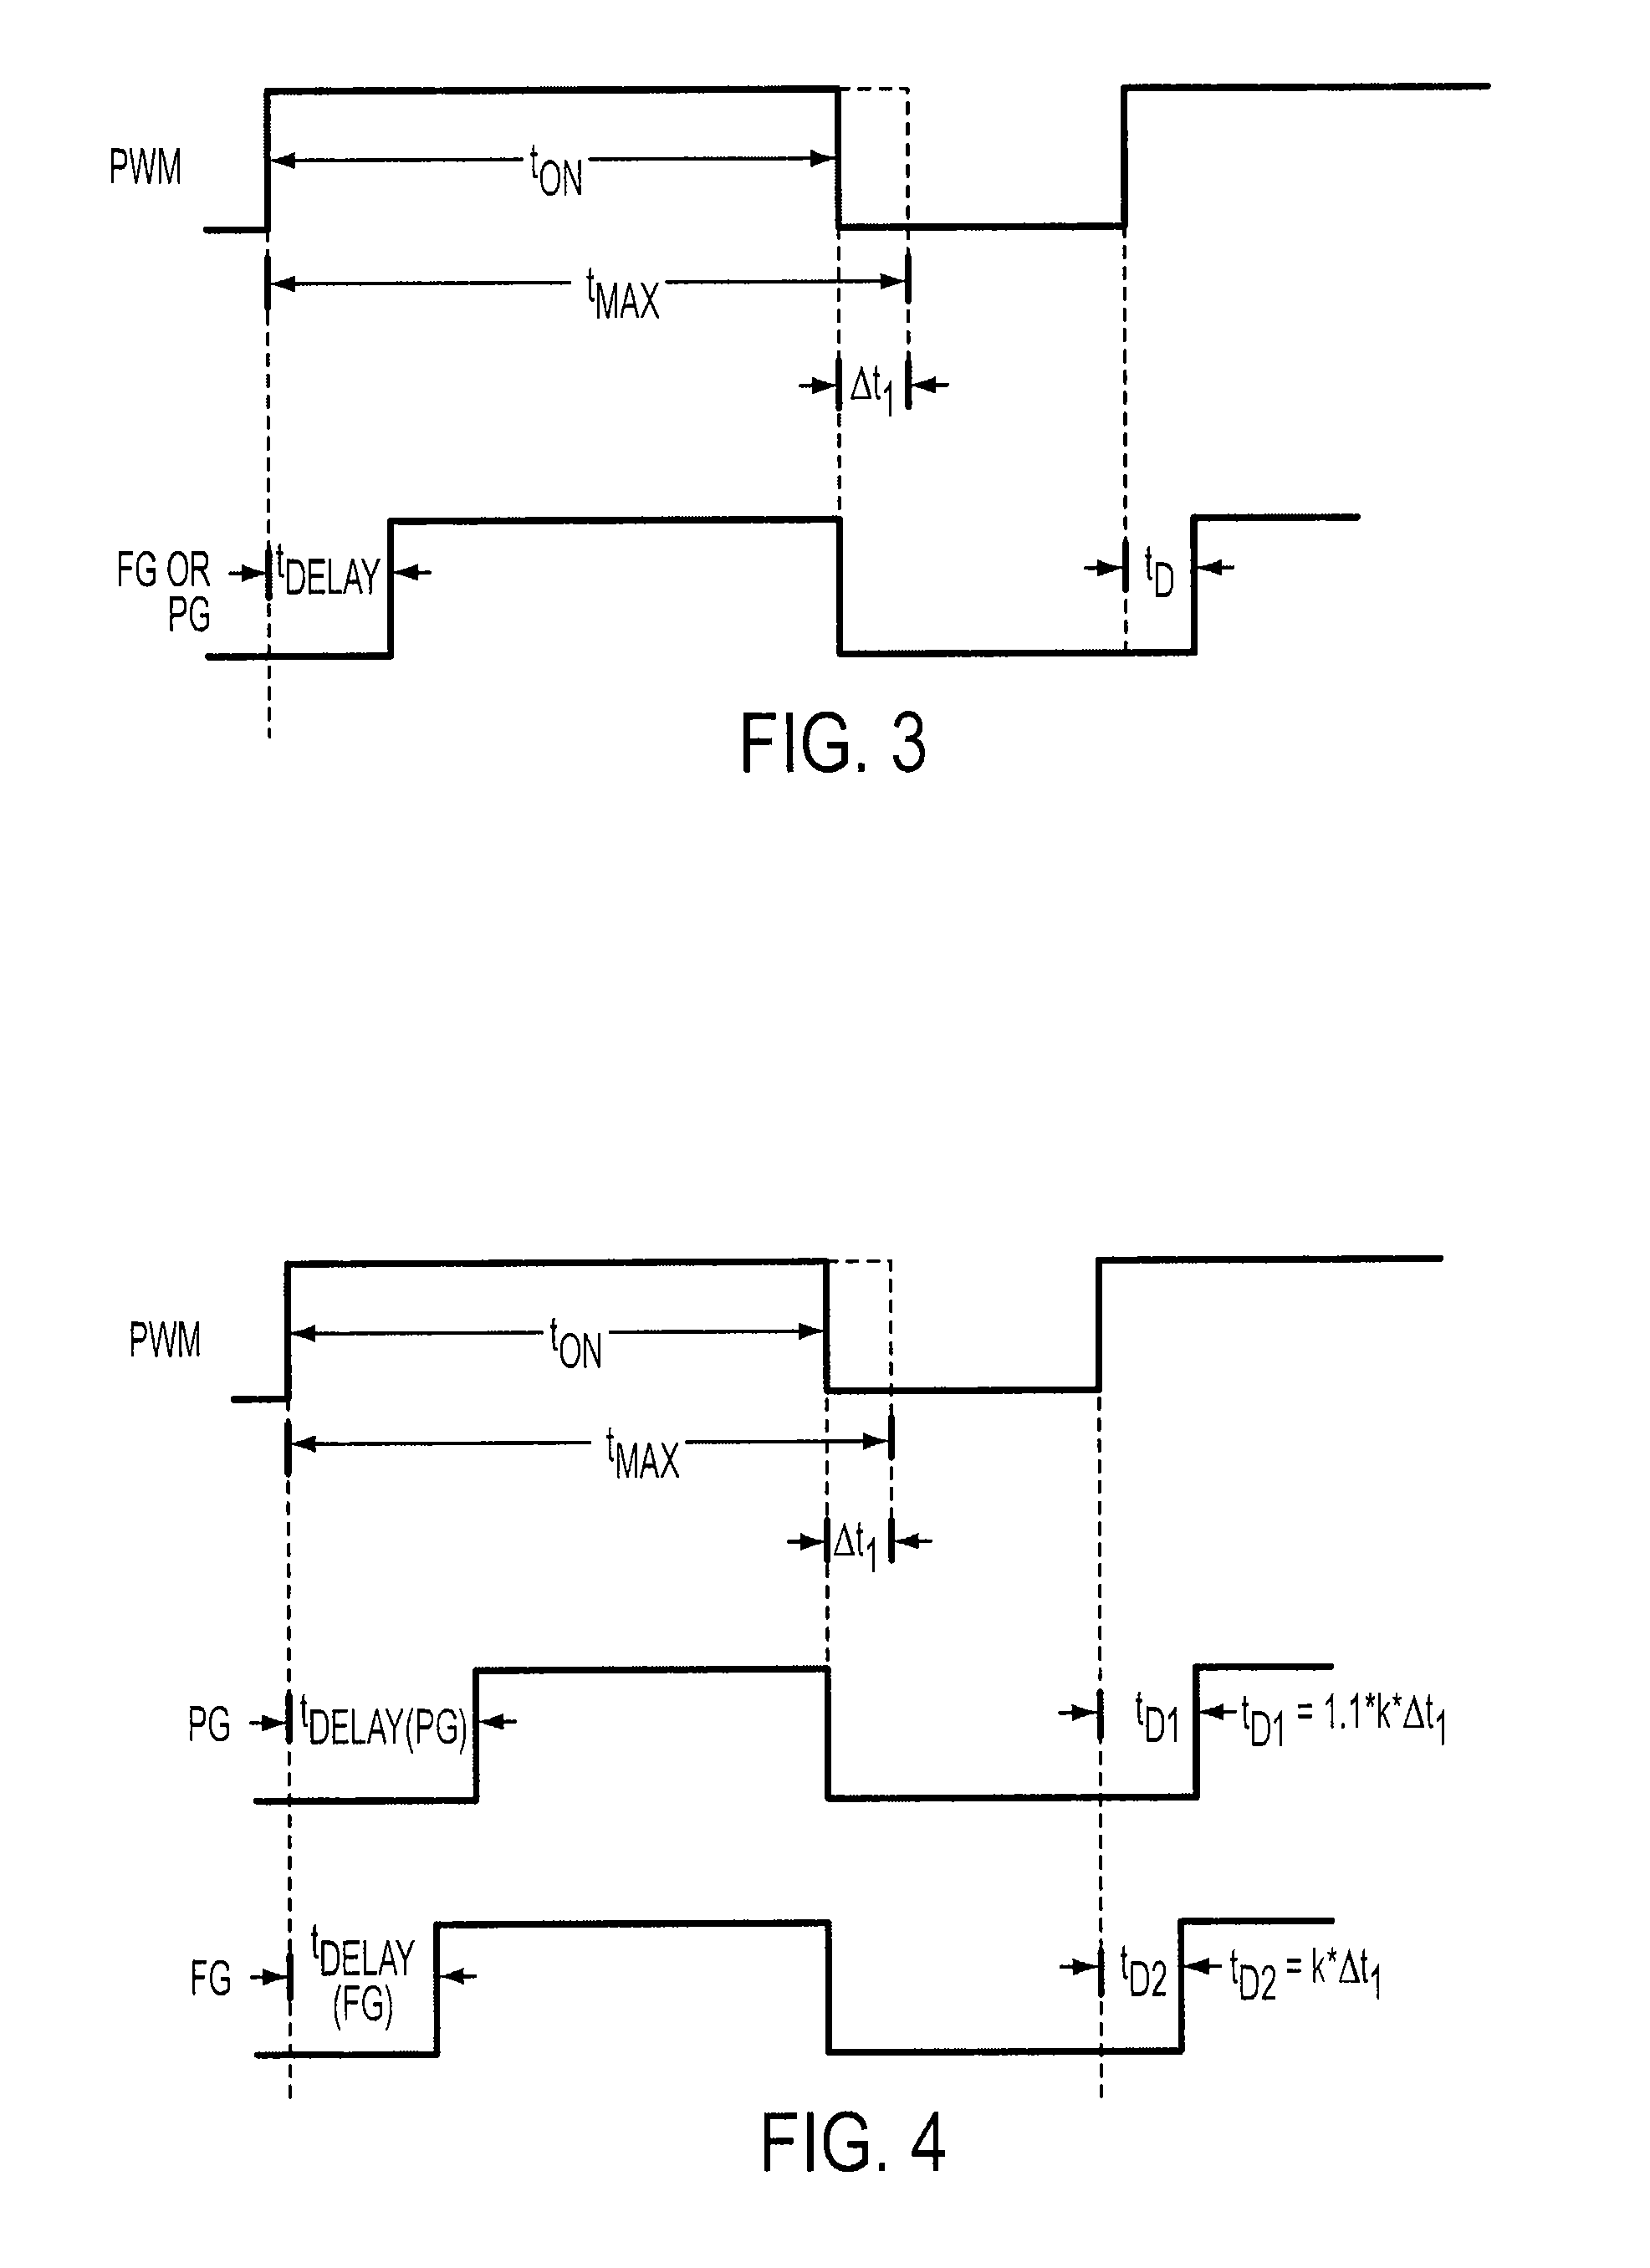 Extending achievable duty cycle range in dc/dc forward converter with active clamp reset